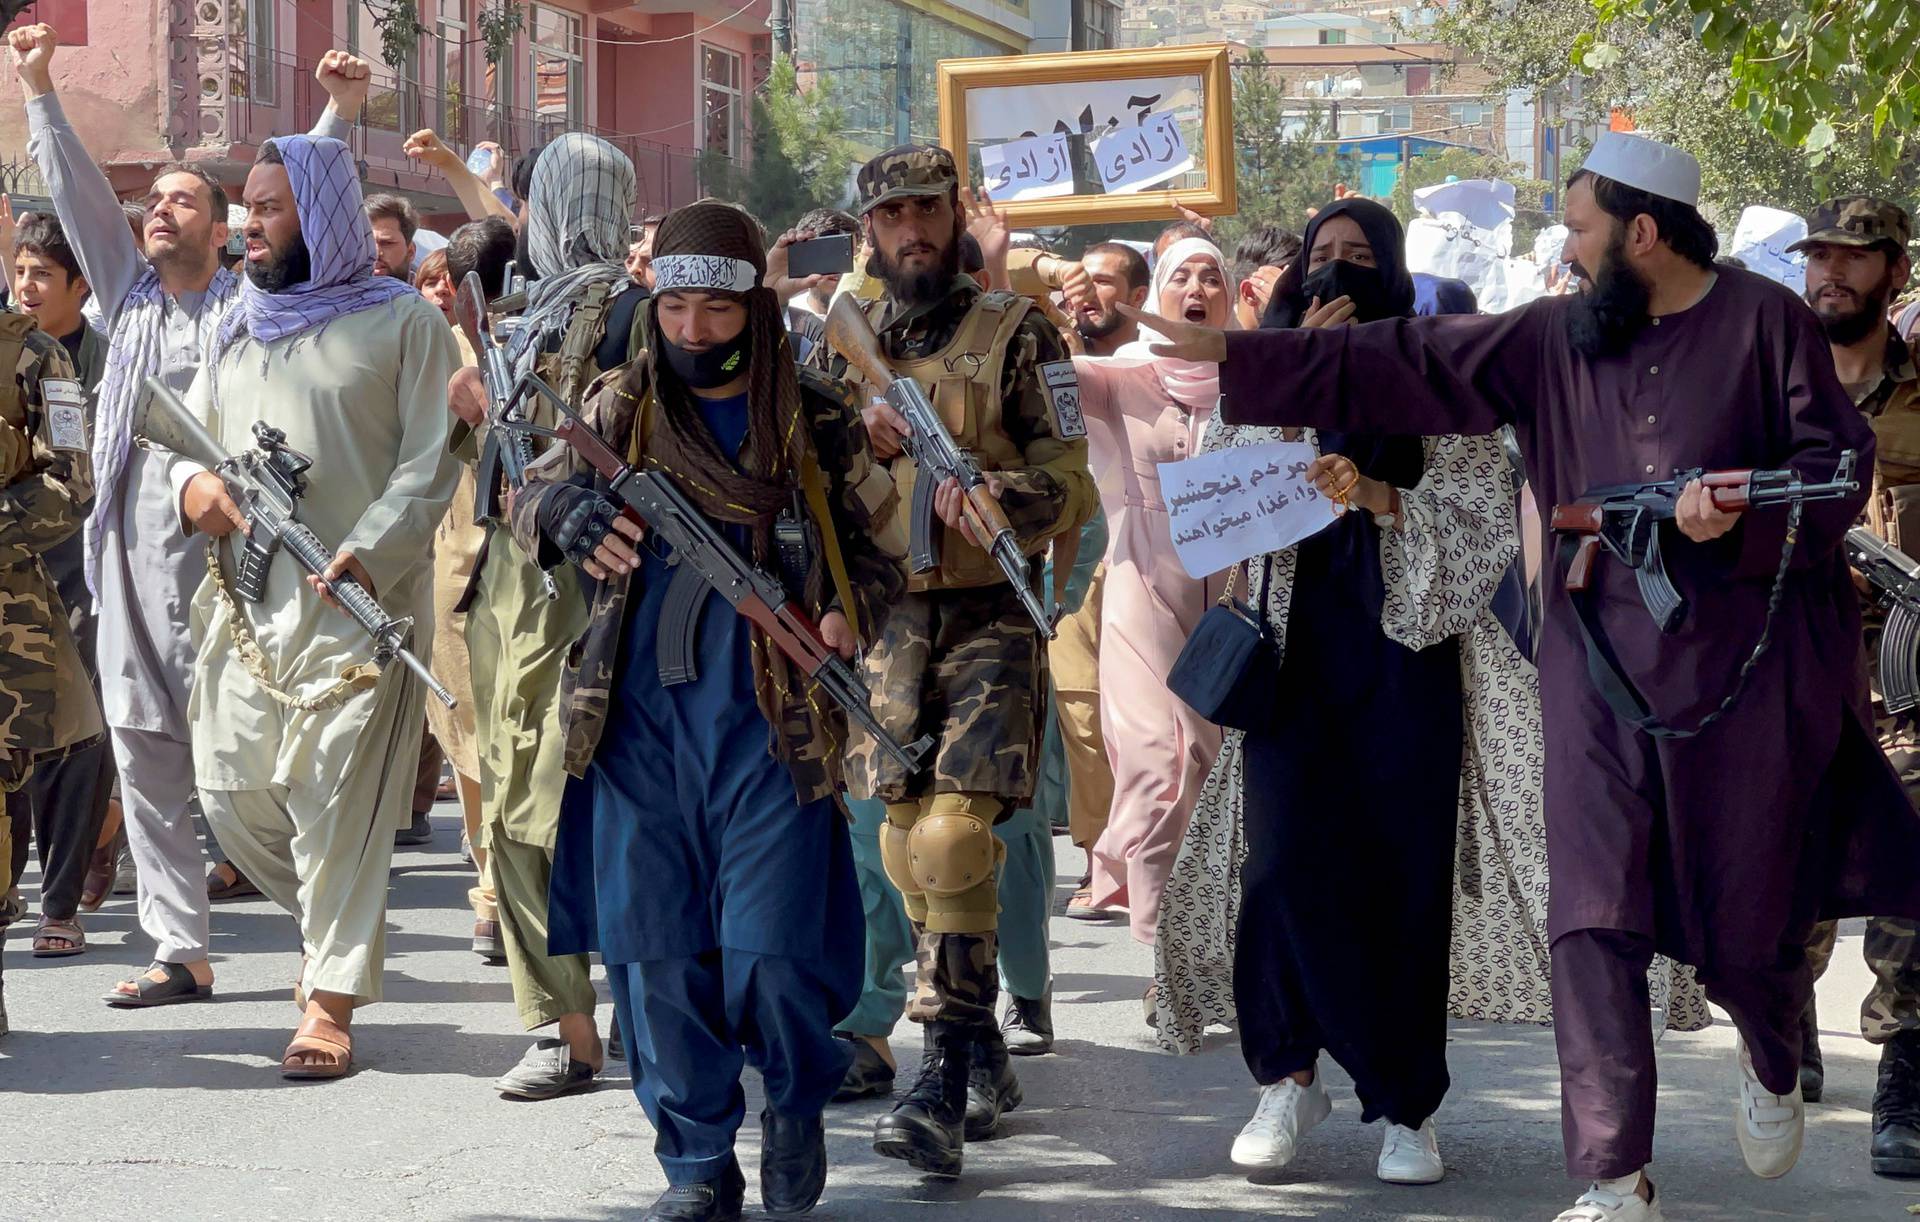 Taliban forces walk in front of Afghan demonstrators as they shout slogans during an anti-Pakistan protest, near the Pakistan embassy in Kabul, Afghanistan